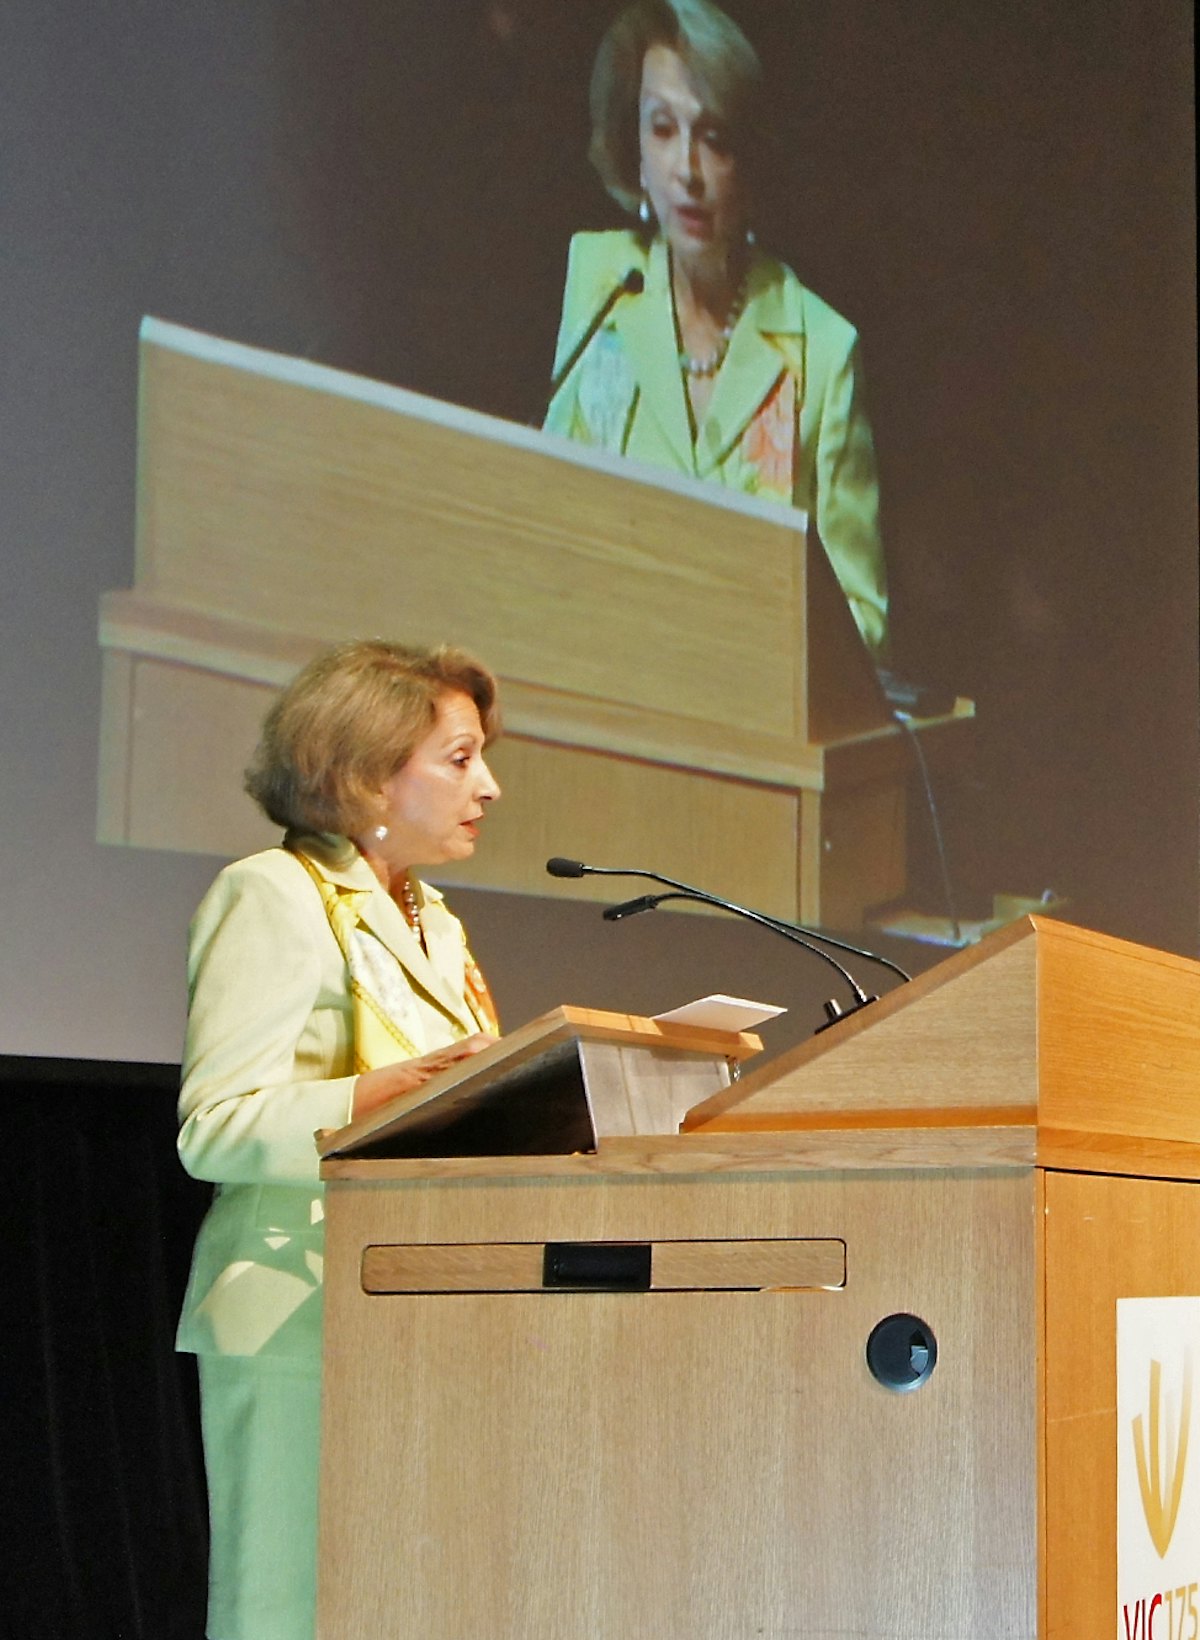 Farzaneh Milani, who teaches Persian literature and women's studies at the University of Virginia, addresses the conference on "Intellectual Othering and the Baha'i Question in Iran," held at the University of Toronto, 1-3 July 2011. Dr. Milani's presentation was part of a session on gender modernity.